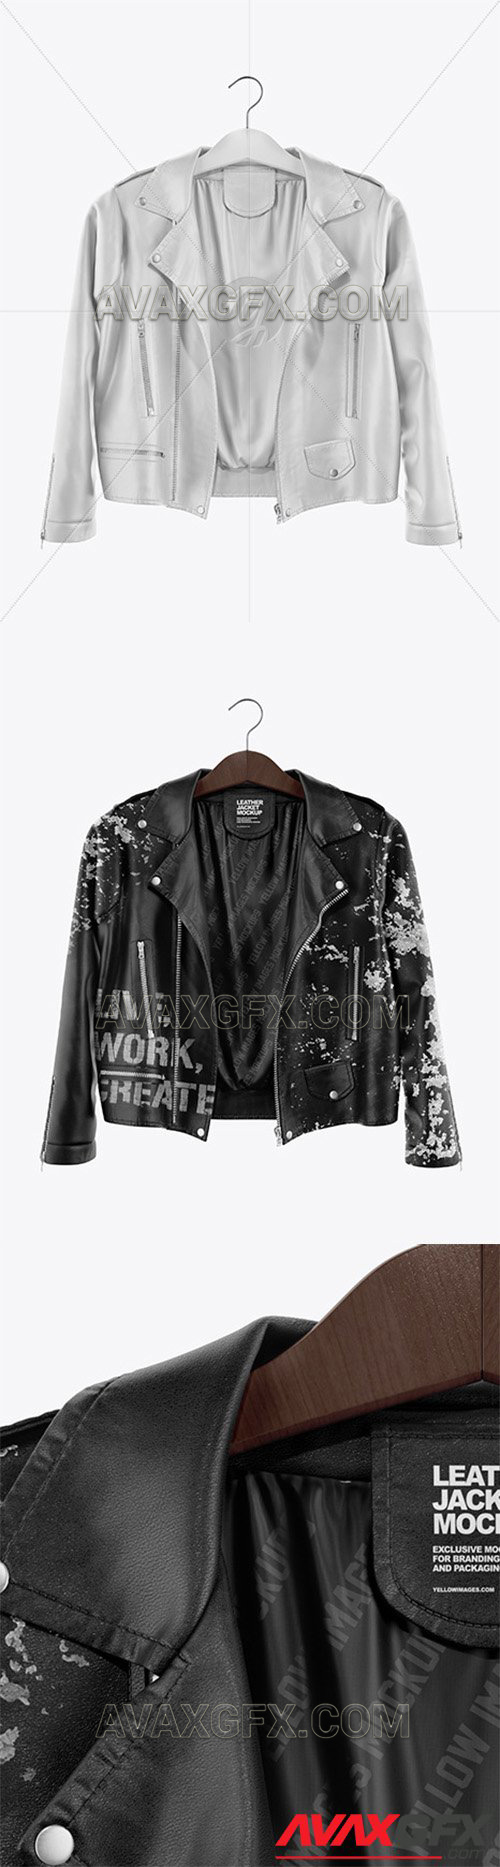 Download Leather Jacket Mockup 59591 Avaxgfx All Downloads That You Need In One Place Graphic From Nitroflare Rapidgator